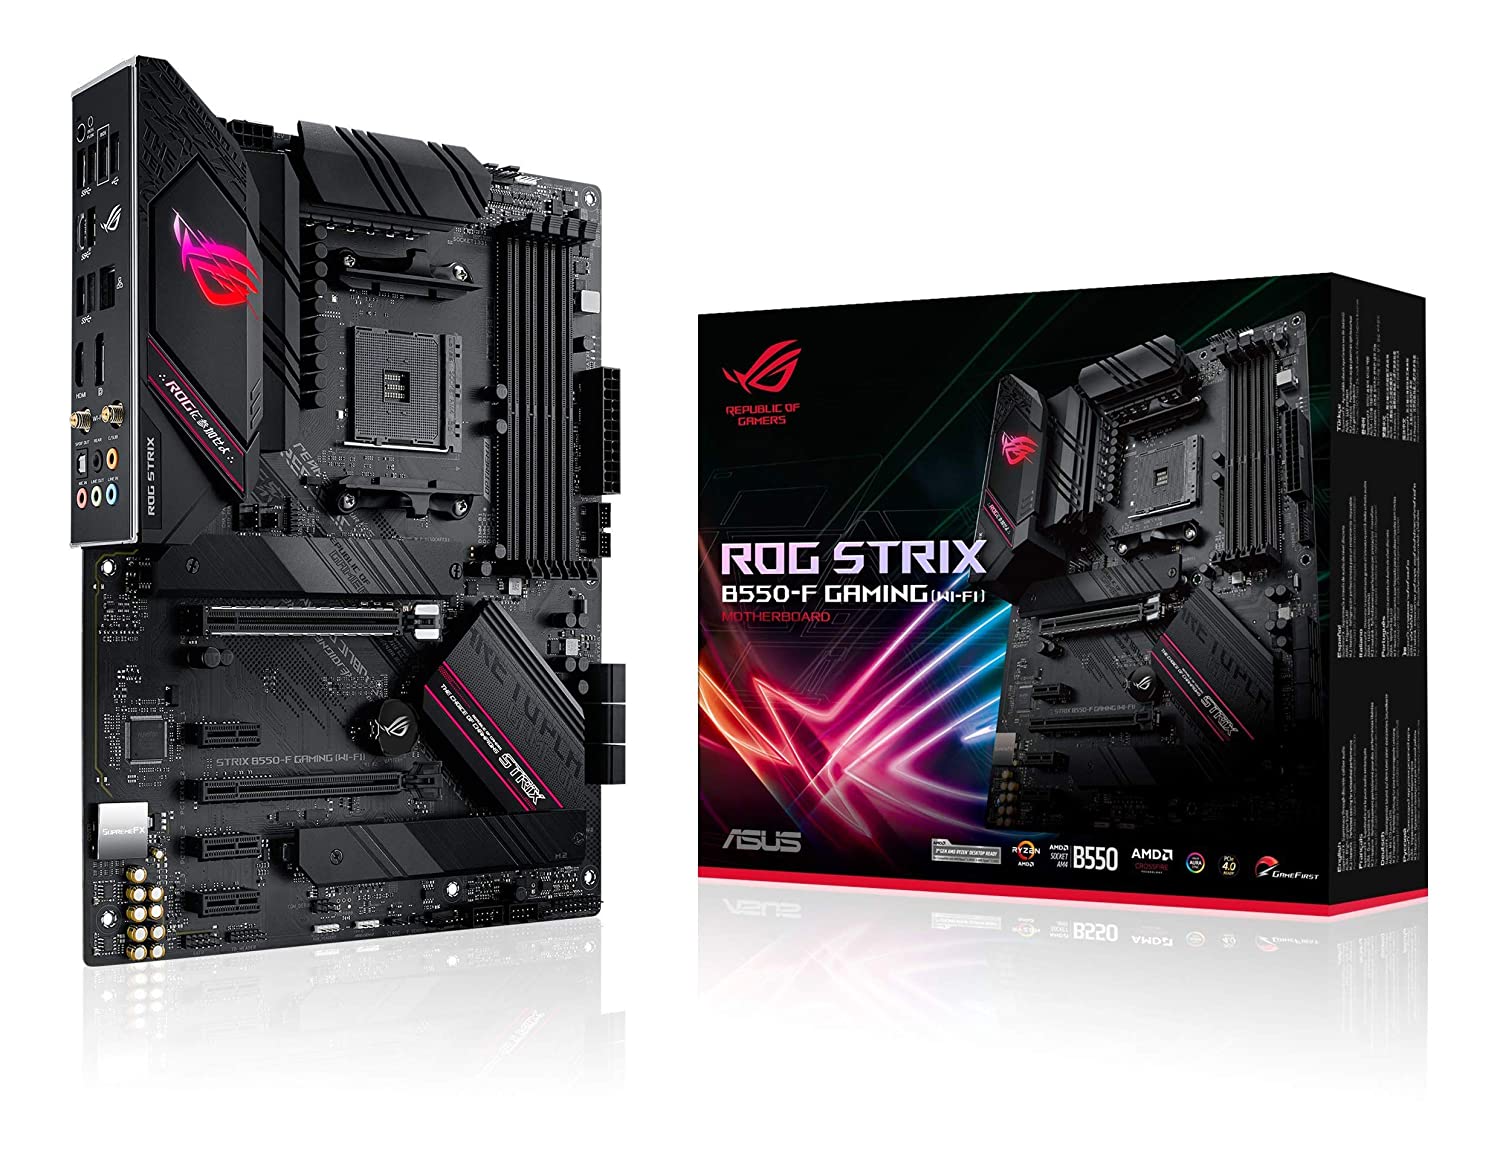 ASUS ROG Strix B550-F Gaming WiFi 6 (AMD AM4 Socket for 3rd Gen AMD Ryzen) ATX Gaming Motherboard with PCIe 4.0, teamed Power Stages, BIOS Flashback